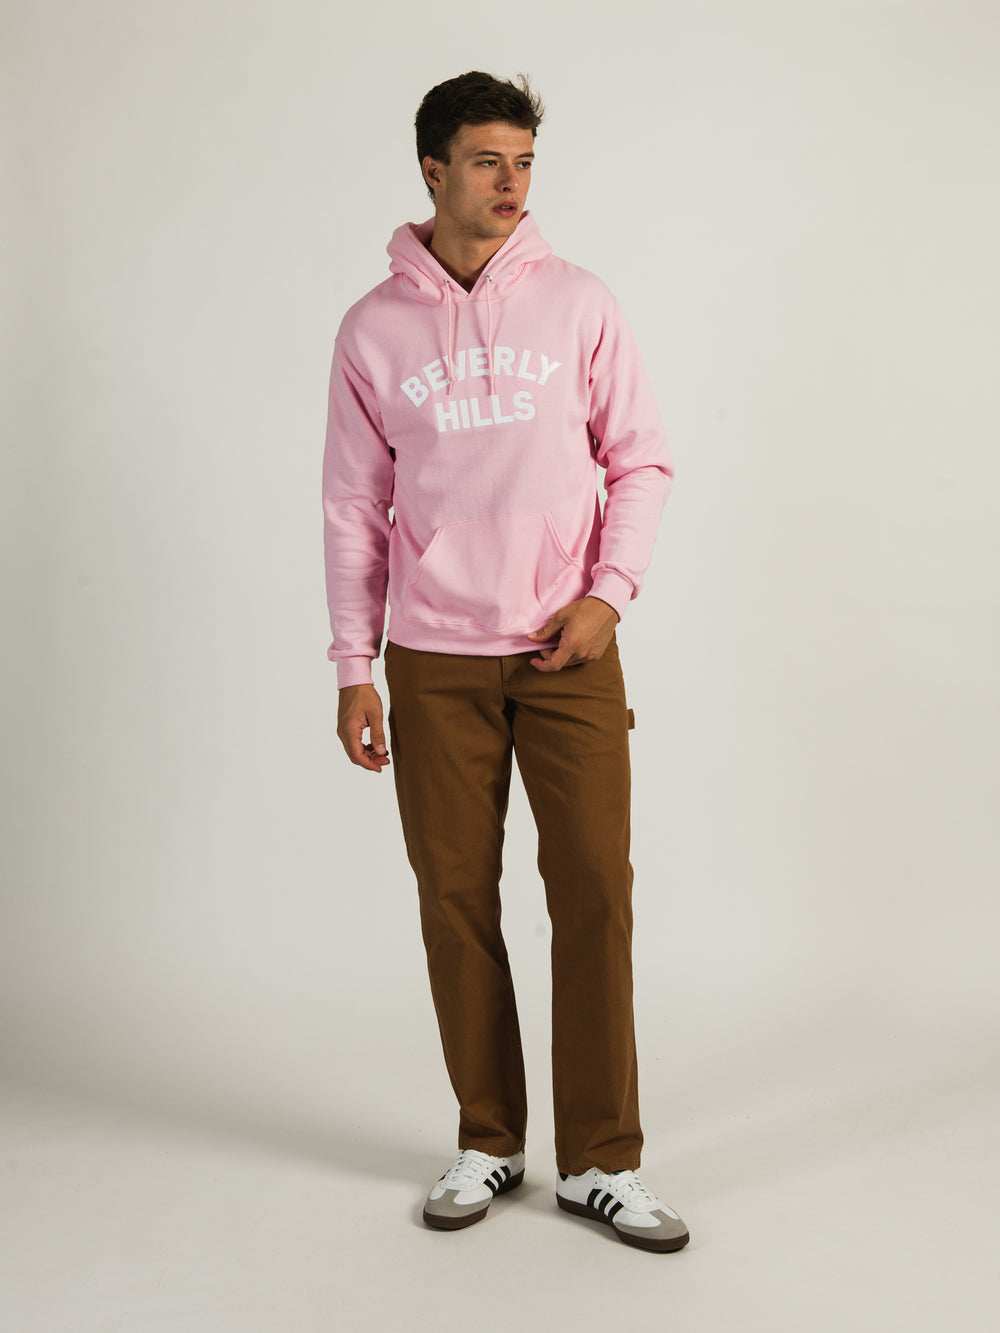 BEVERLY HILLS HOODIE  - CLEARANCE